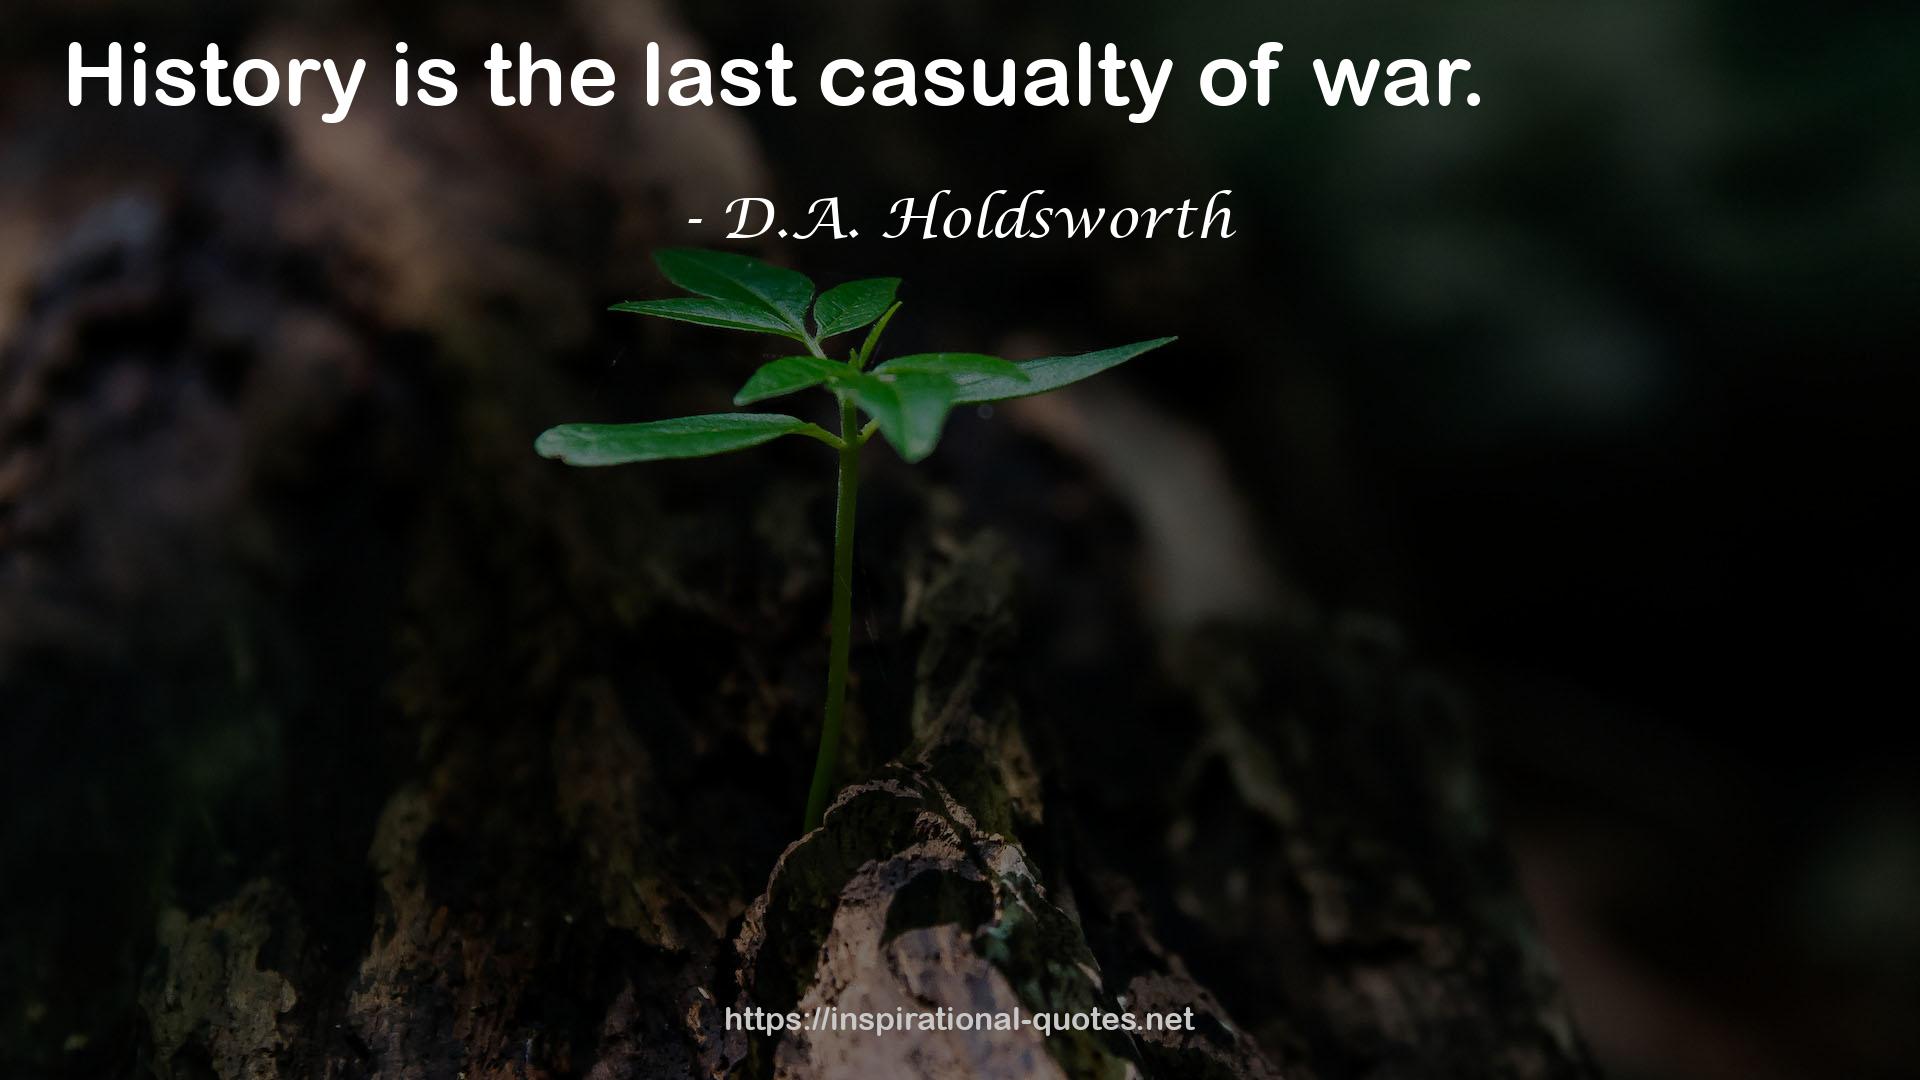 D.A. Holdsworth QUOTES